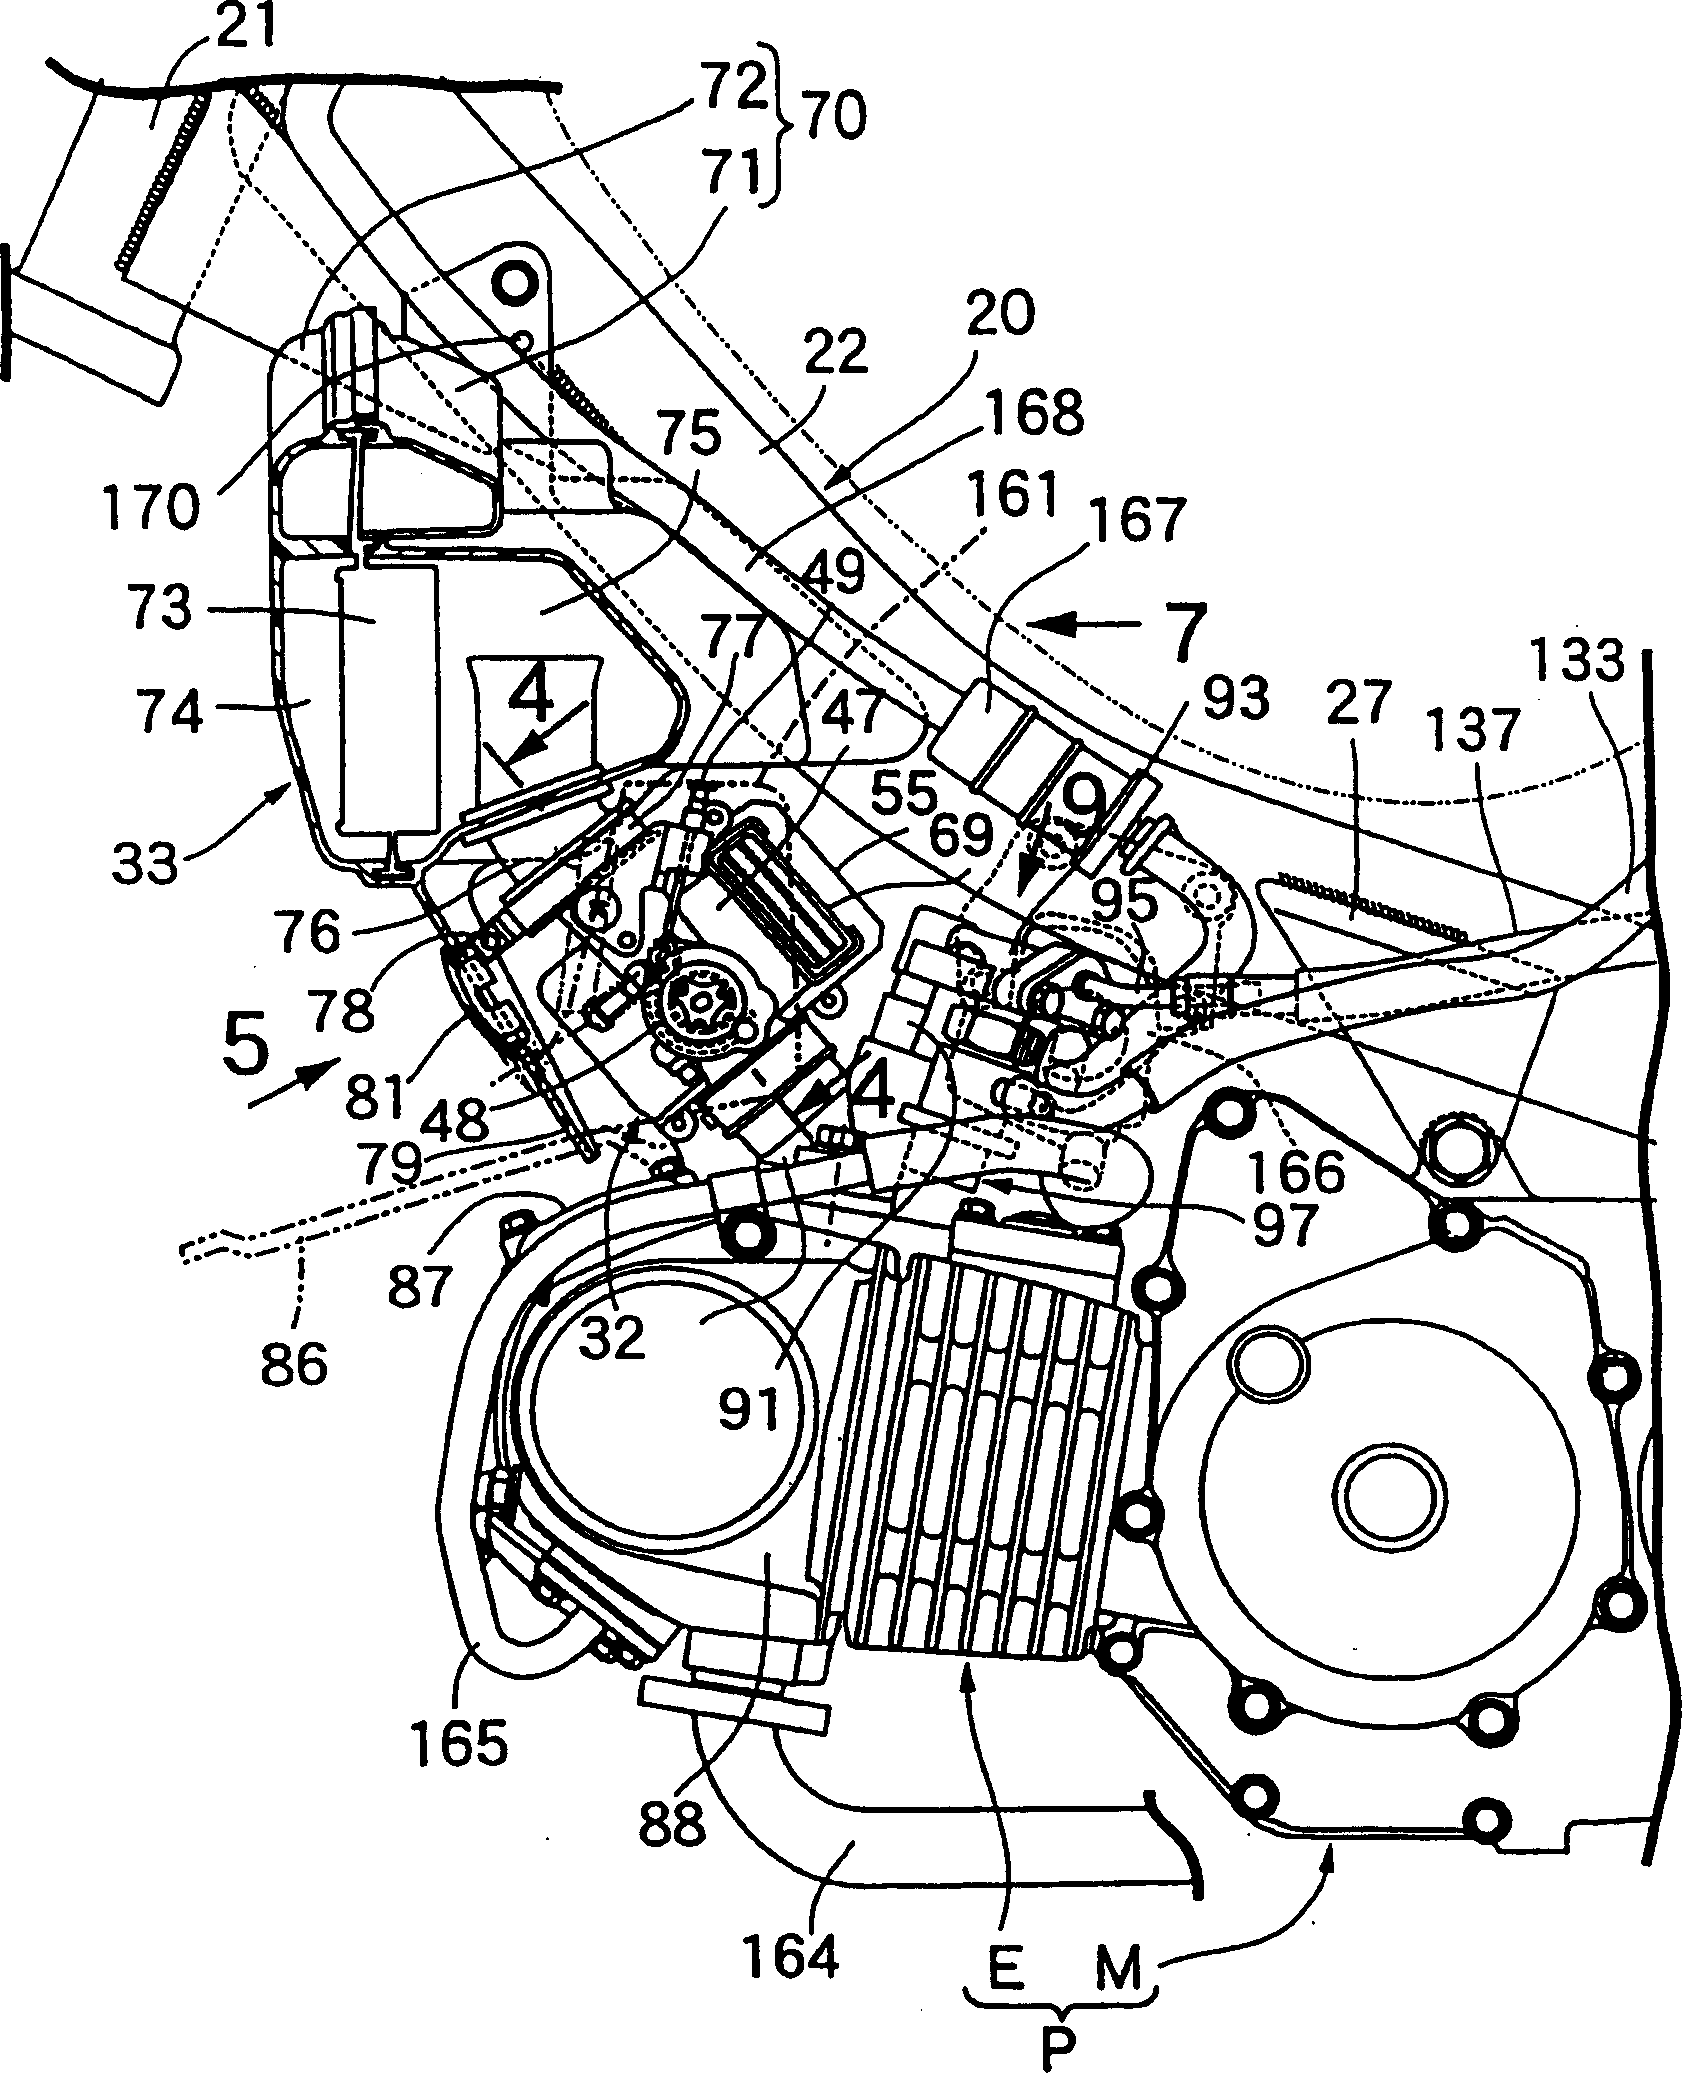 Structure for disposing fuel system in motor